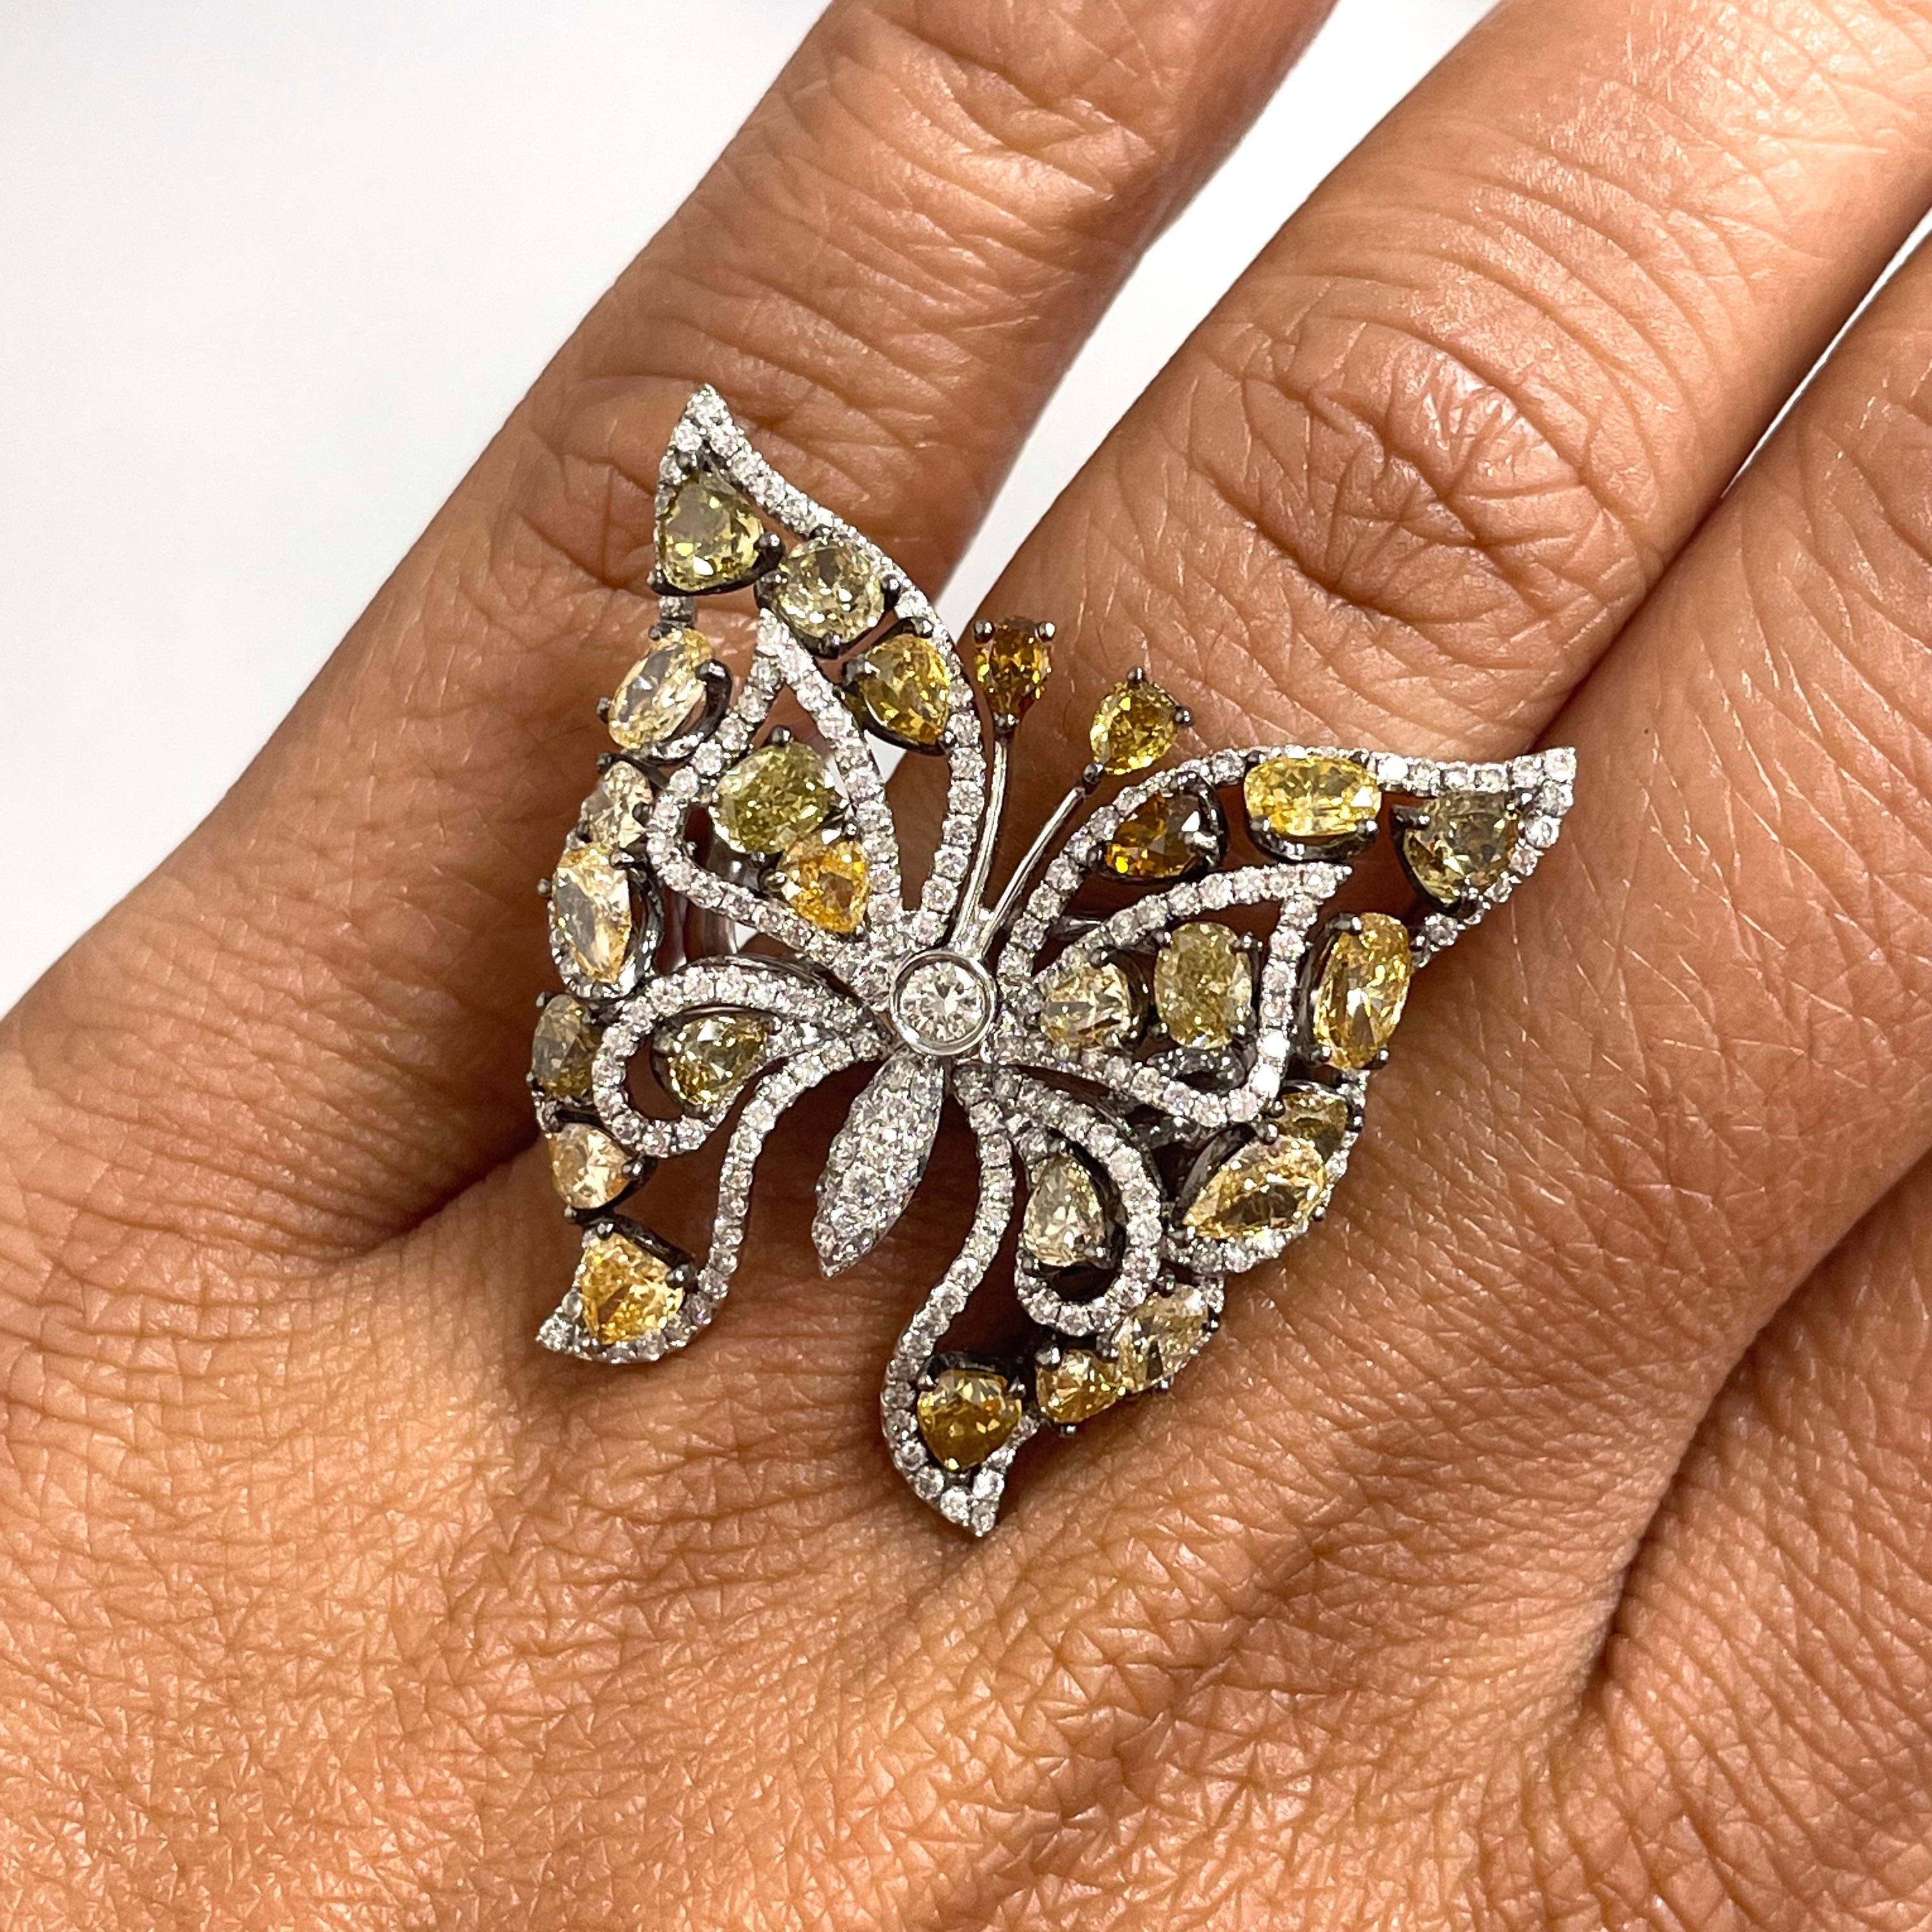 The vibrant colors of this one of a kind butterfly ring make it an ideal statement ring for any celebration.

Diamonds Shapes: Pear Shape, Oval, Cushion & Trillion 
Diamonds Weight: 3.80 ct 
Diamonds Color: Fancy Orange, Green, Yellow & Brown